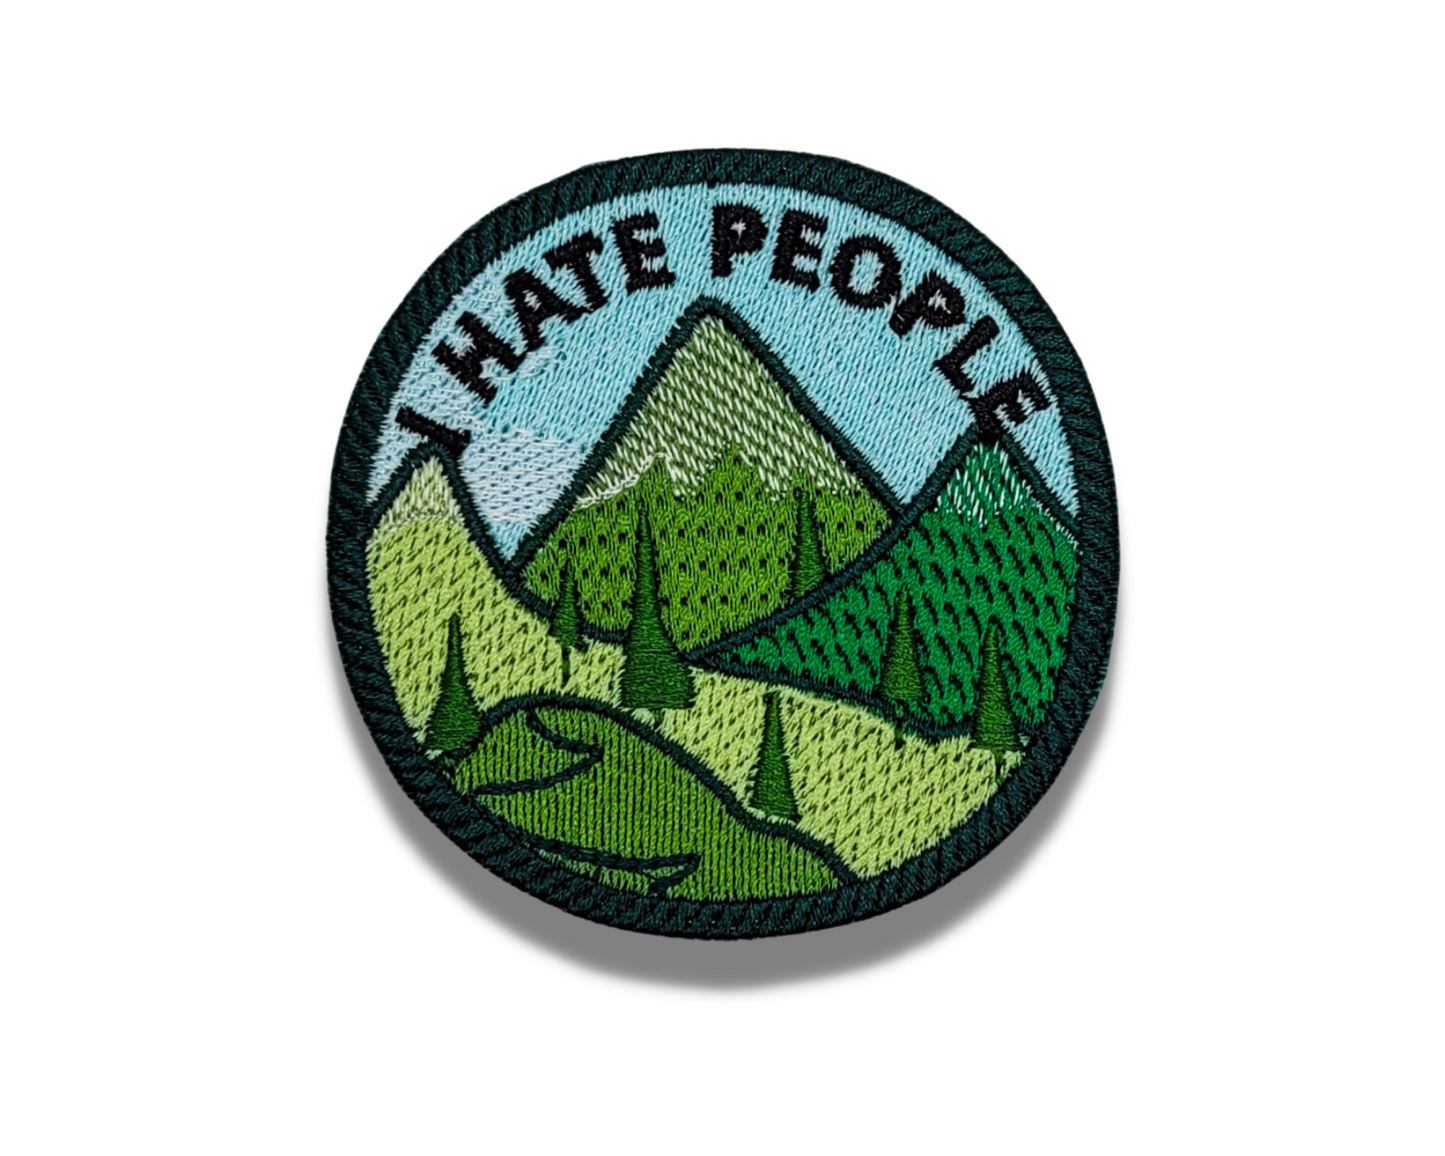 I Hate People Embroidered Patch